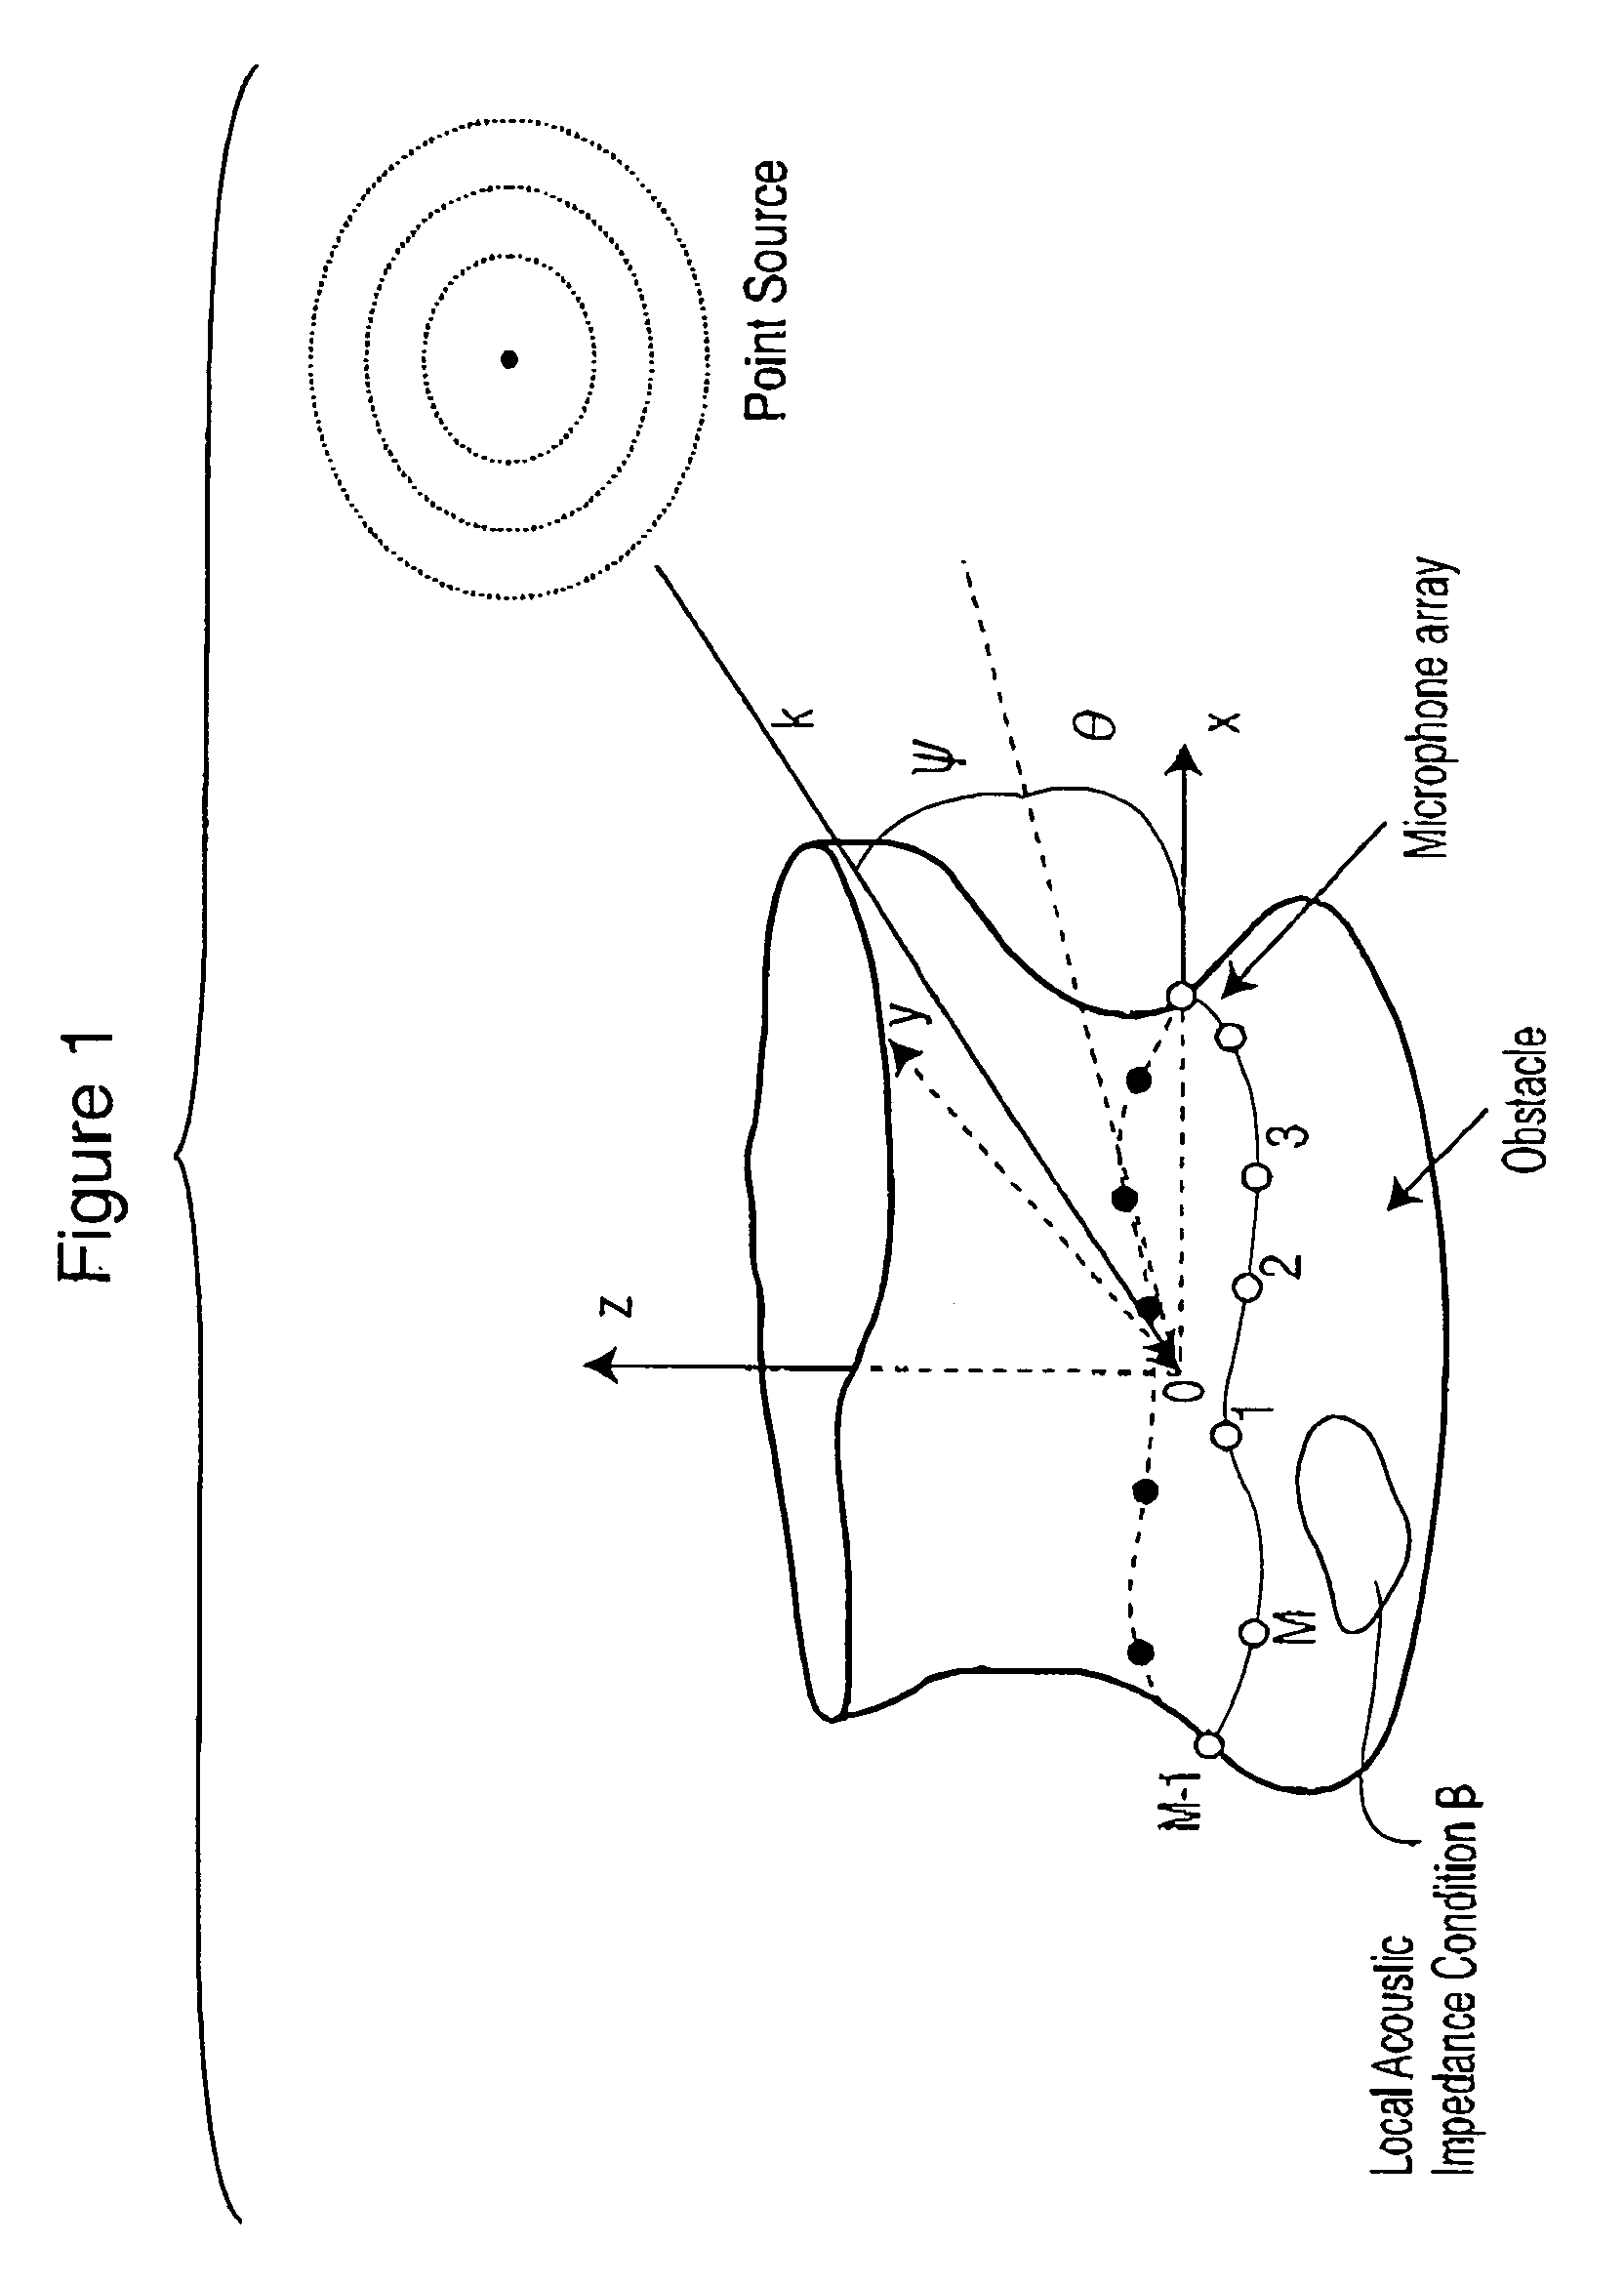 Method of broadband constant directivity beamforming for non linear and non axi-symmetric sensor arrays embedded in an obstacle